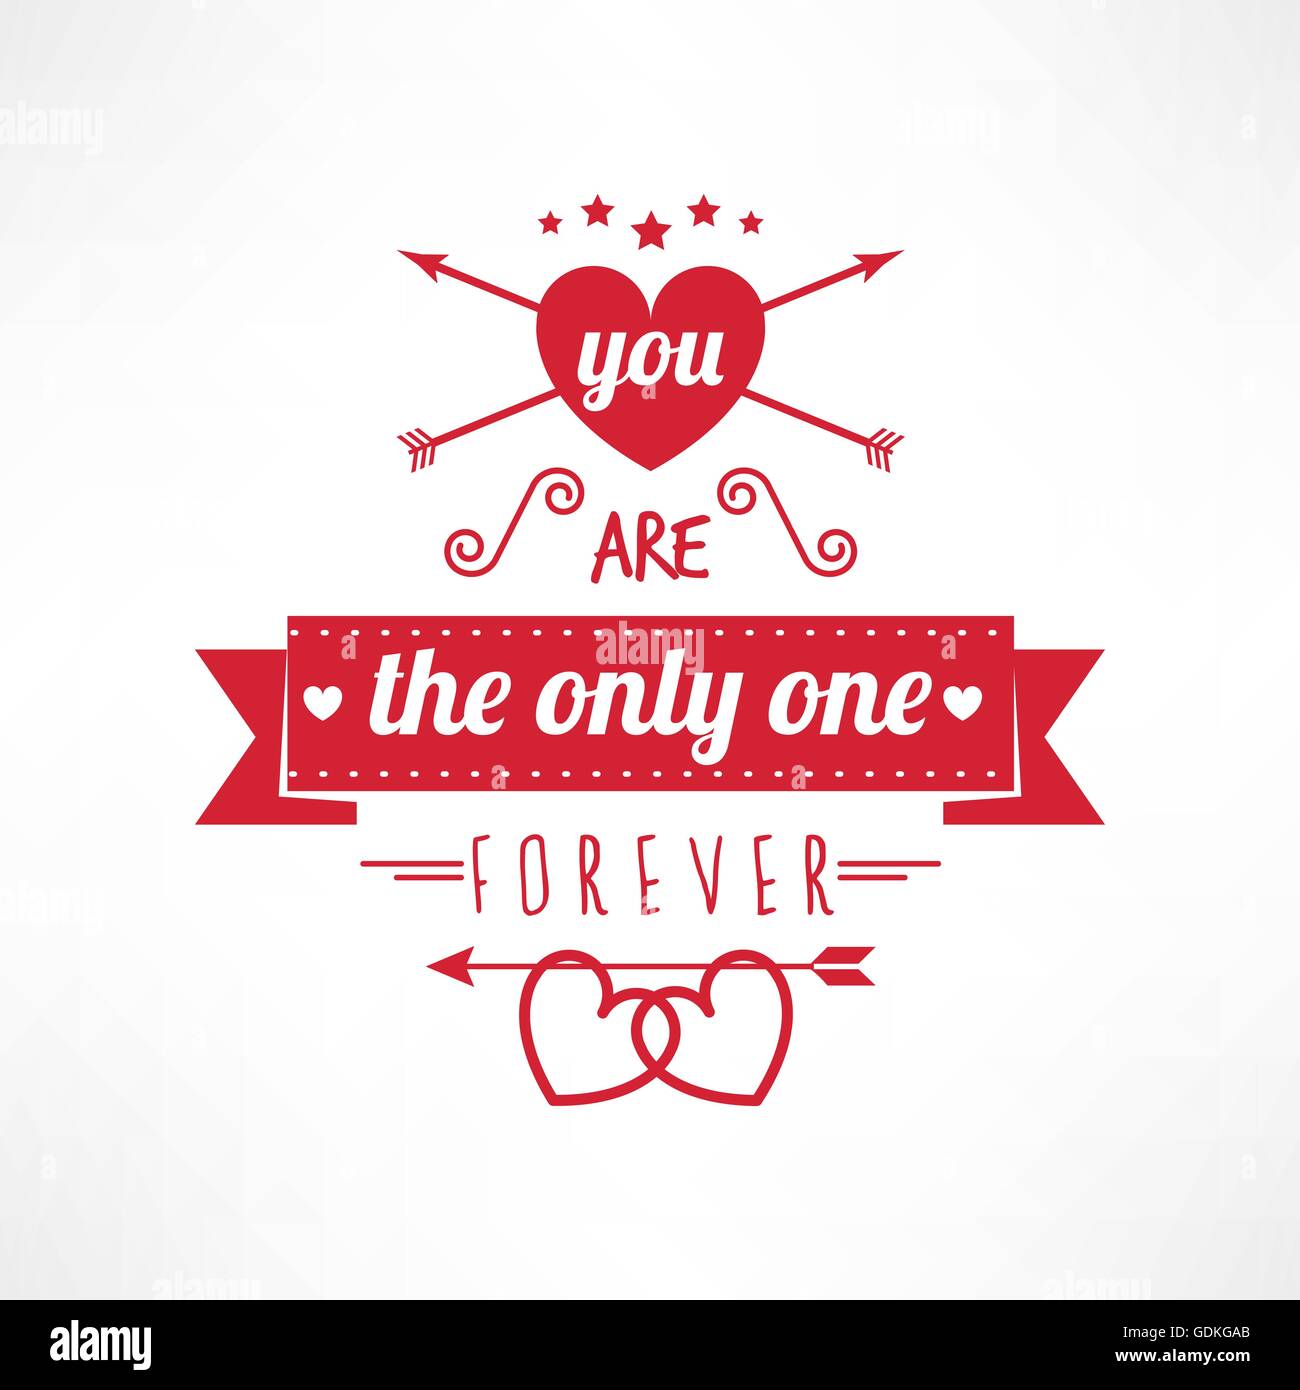 You are the only one text, st valentine love card Stock Vector